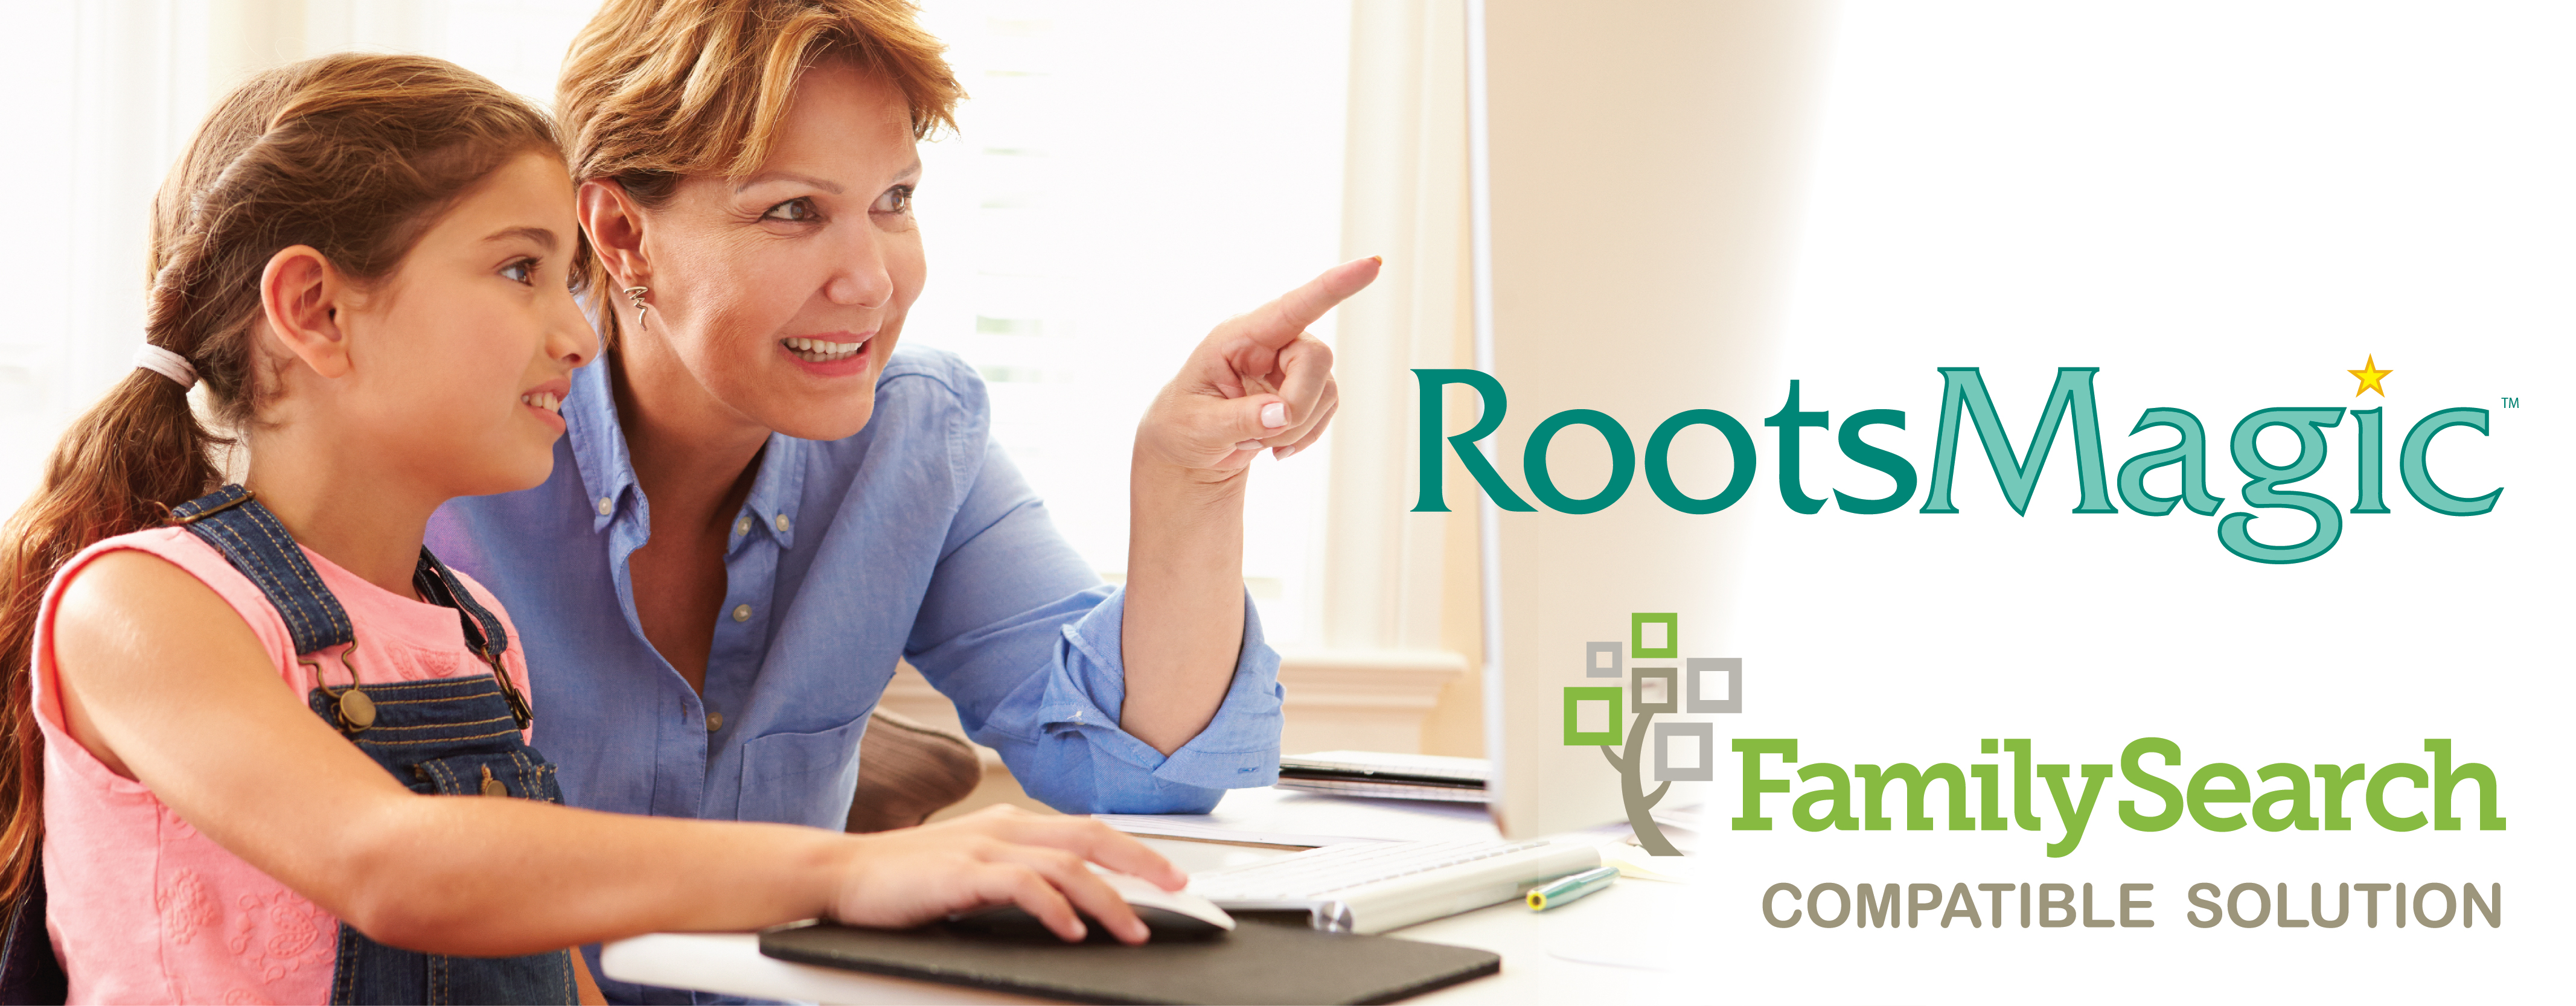 RootsMagic - FamilySearch Compatible Solution